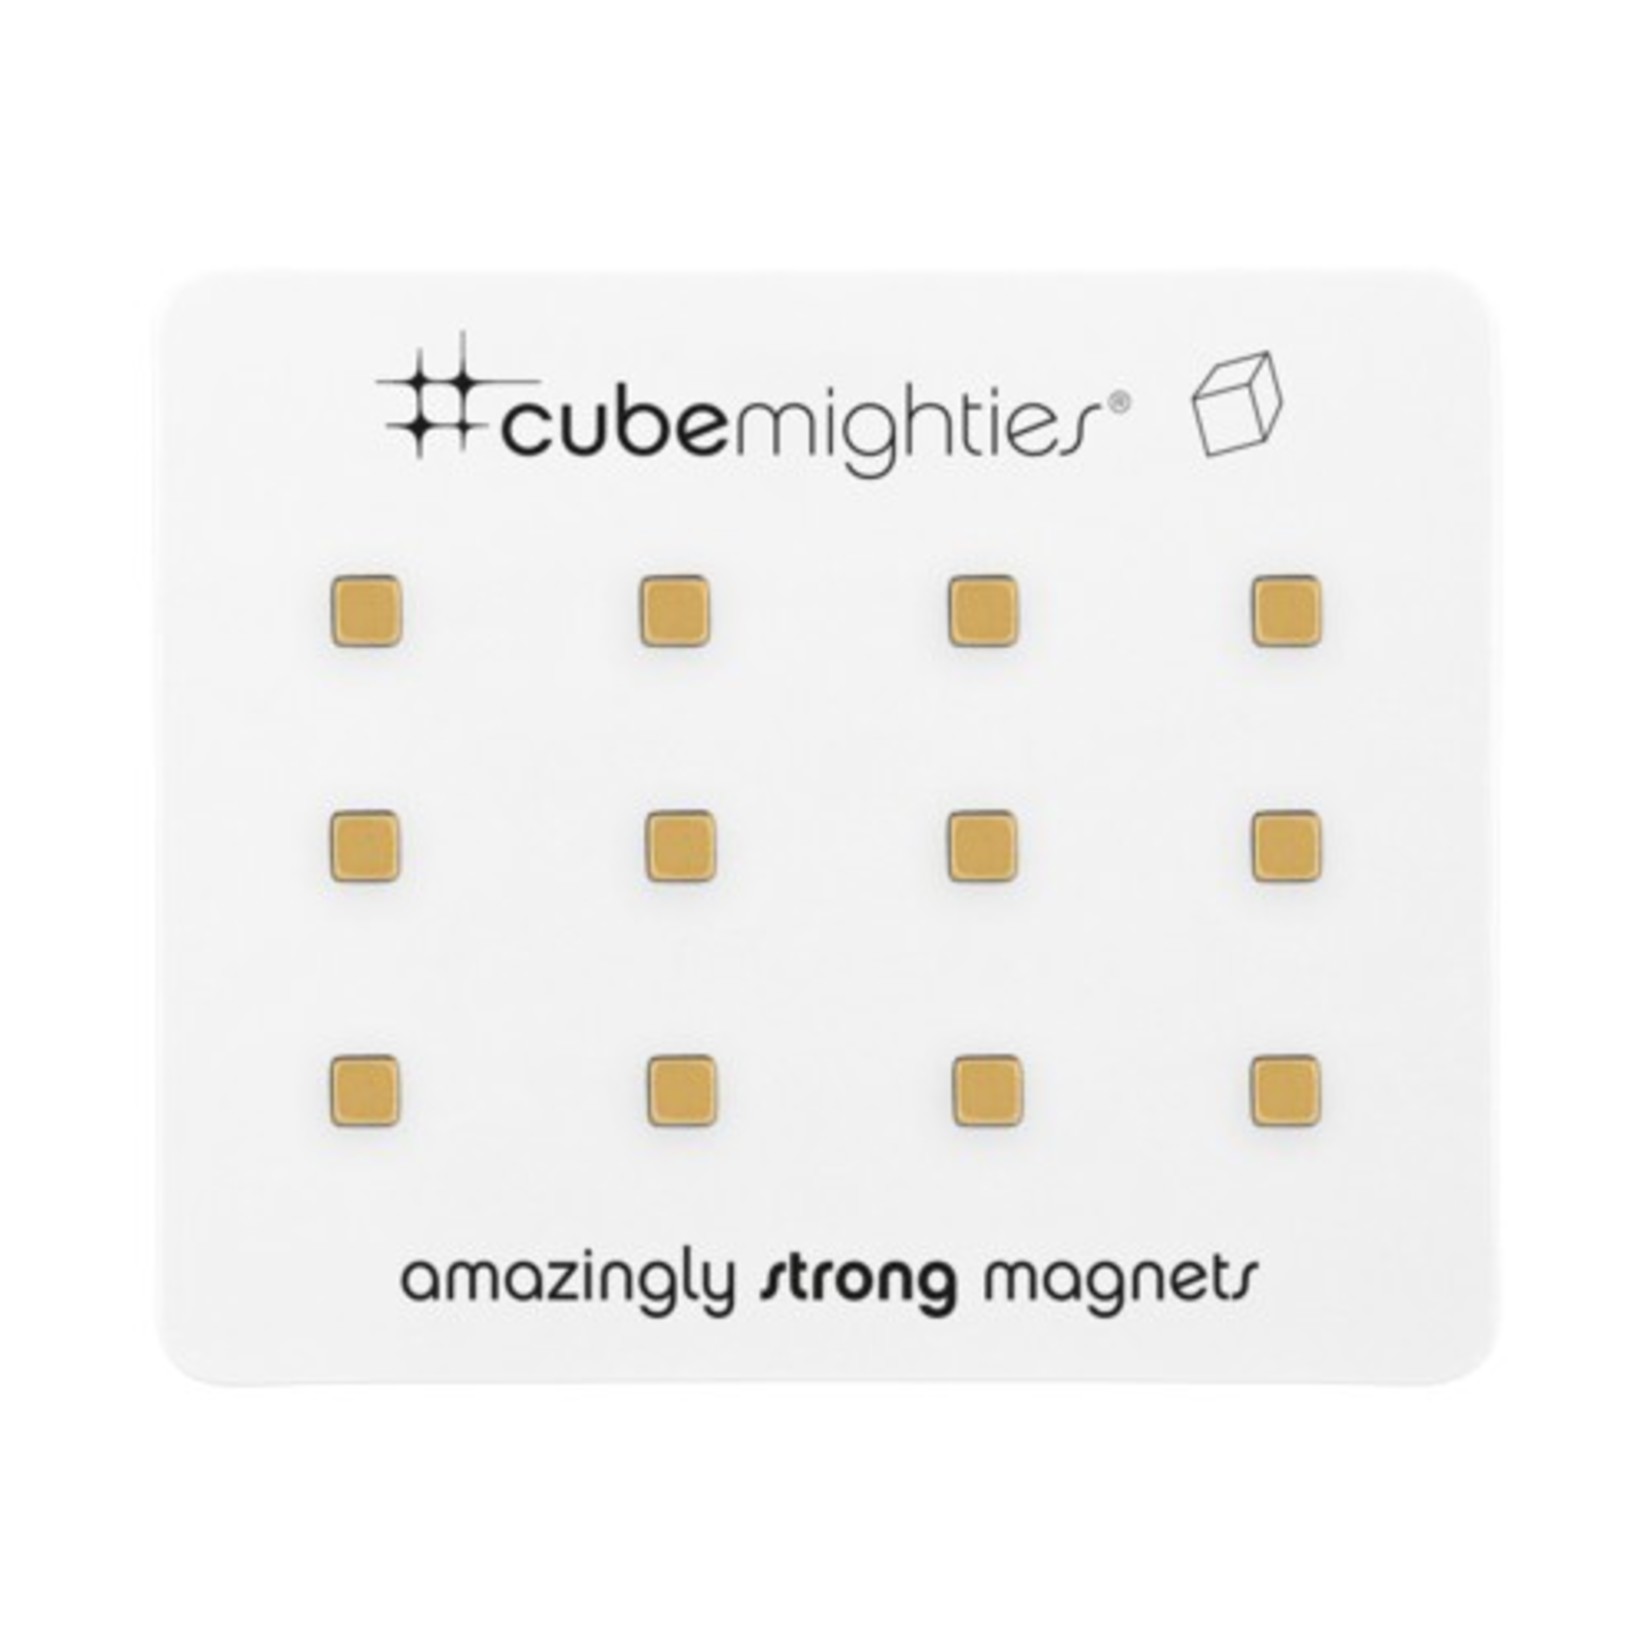 THREE BY THREE 12 Cube Mighty Magnet in Gold